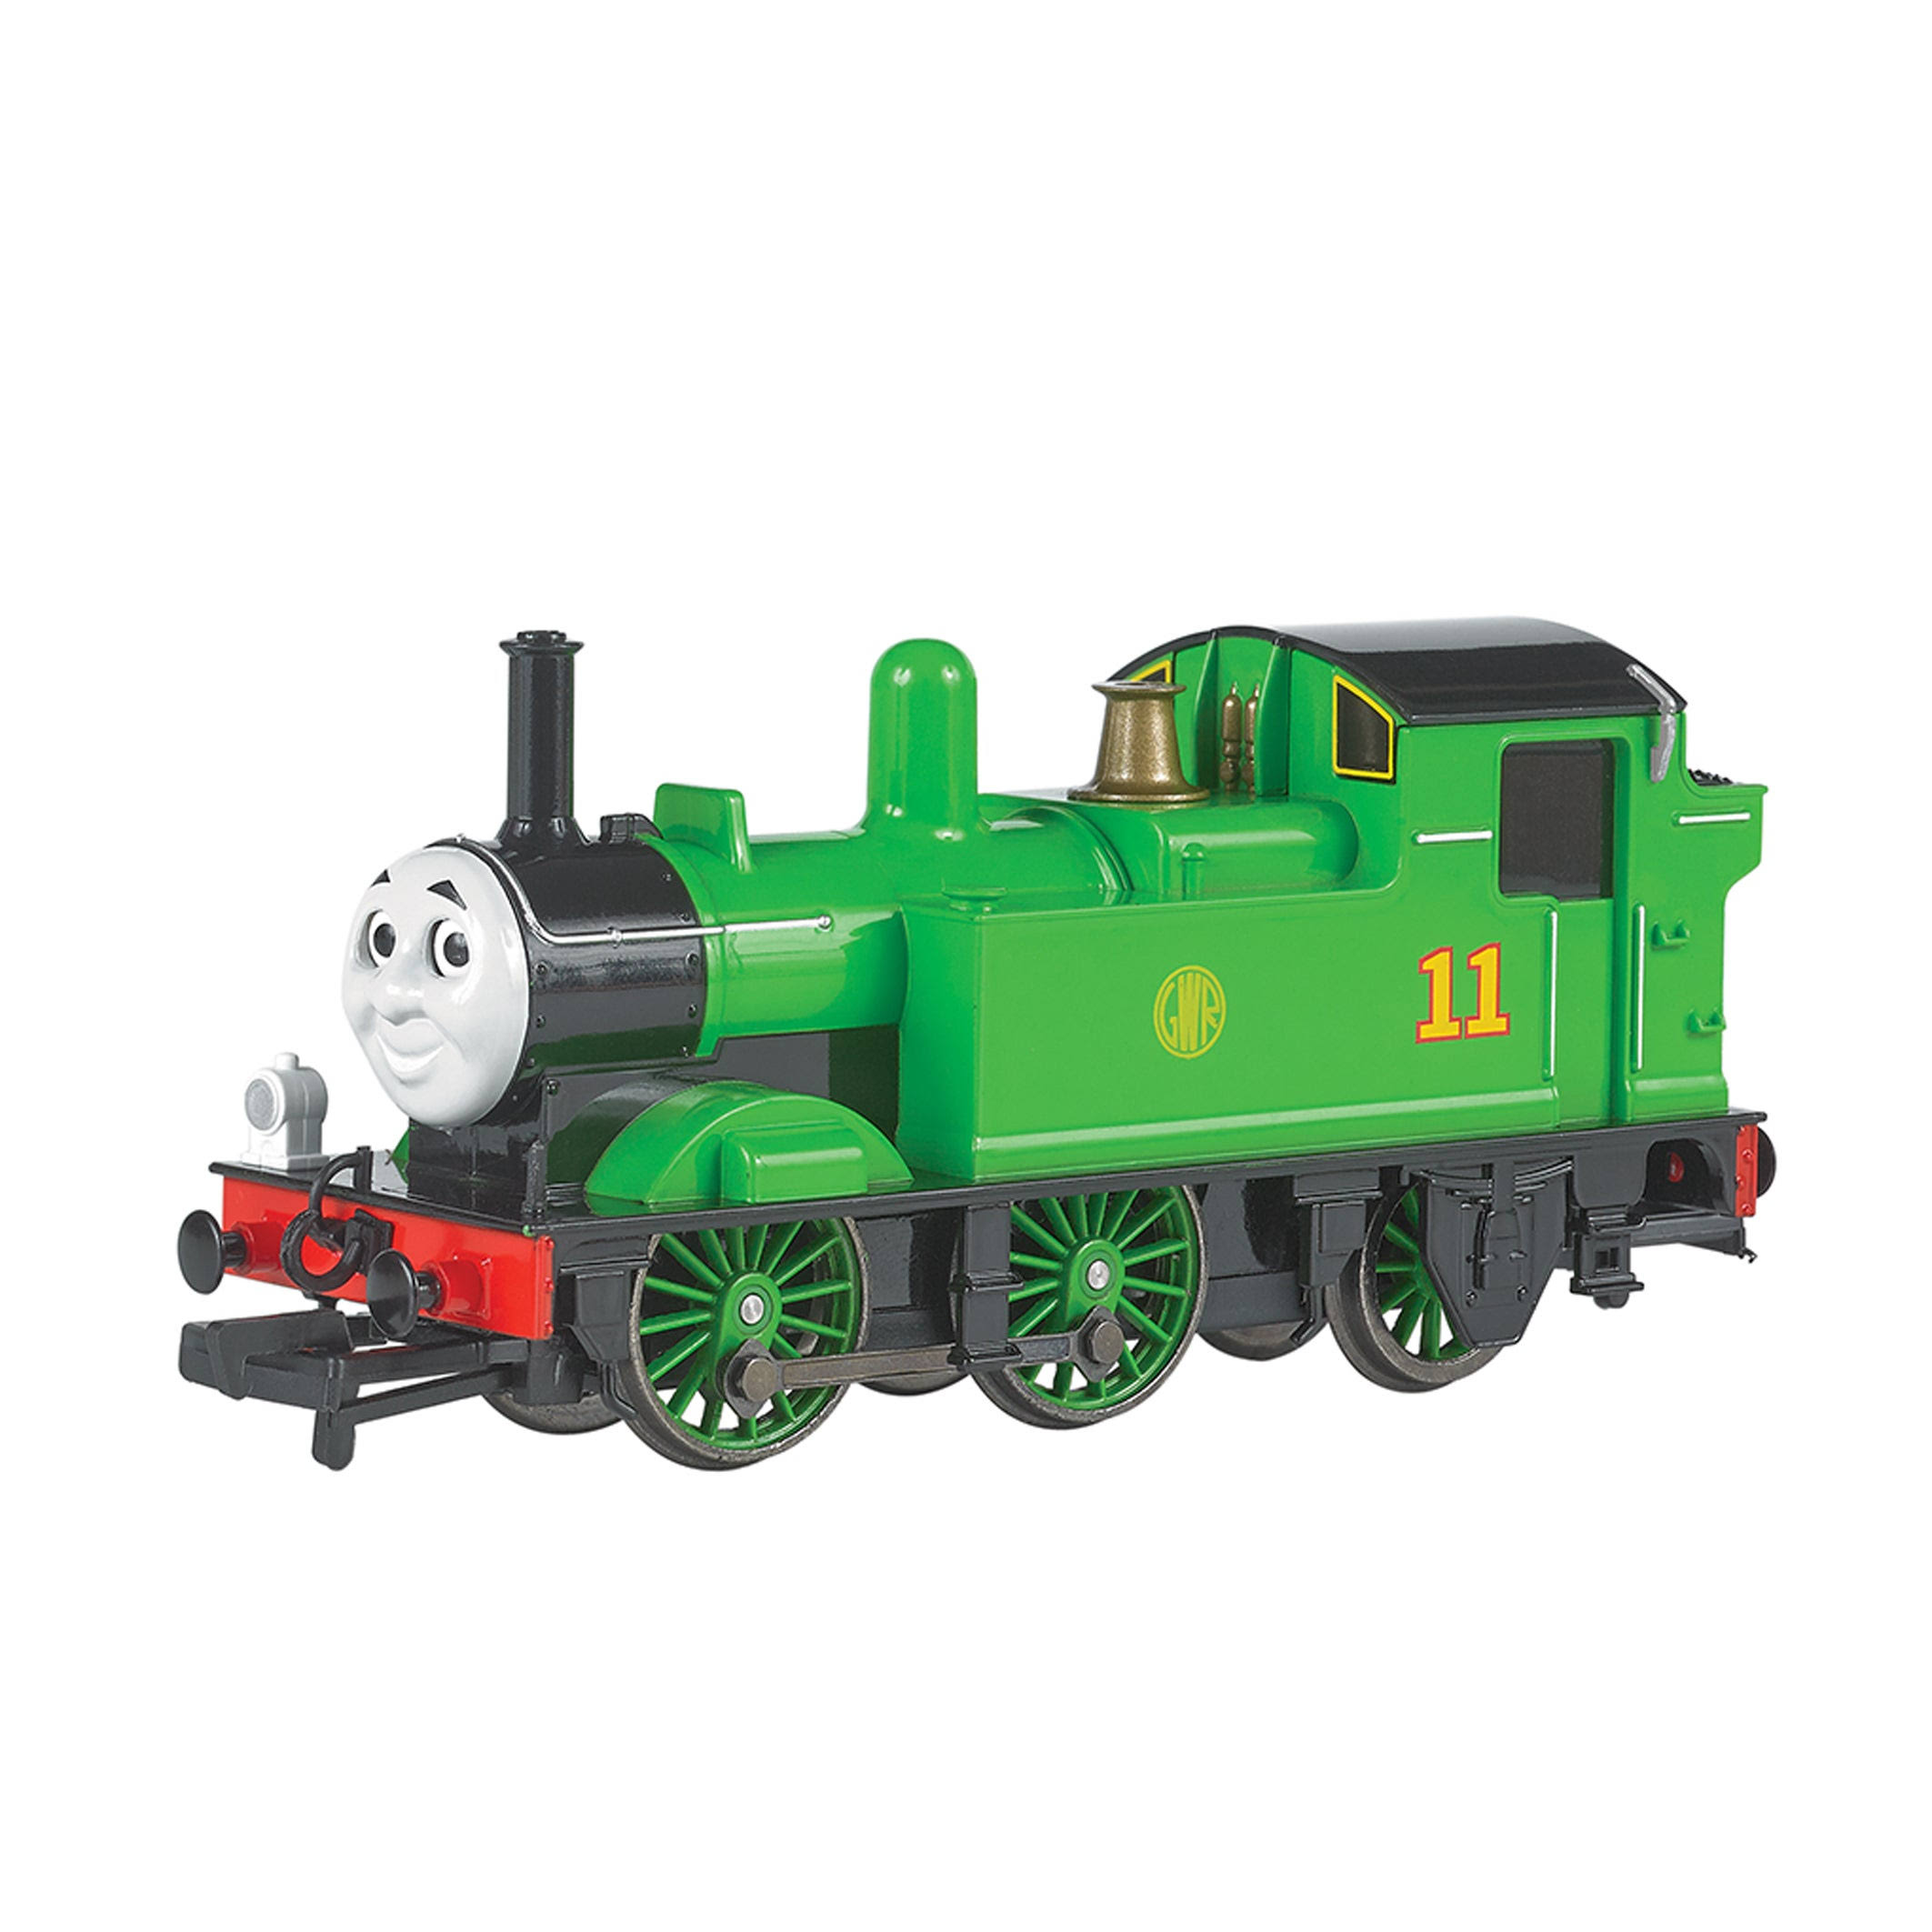 Bachmann 58815 Ho Scale Thomas Oliver with Moving Eyes